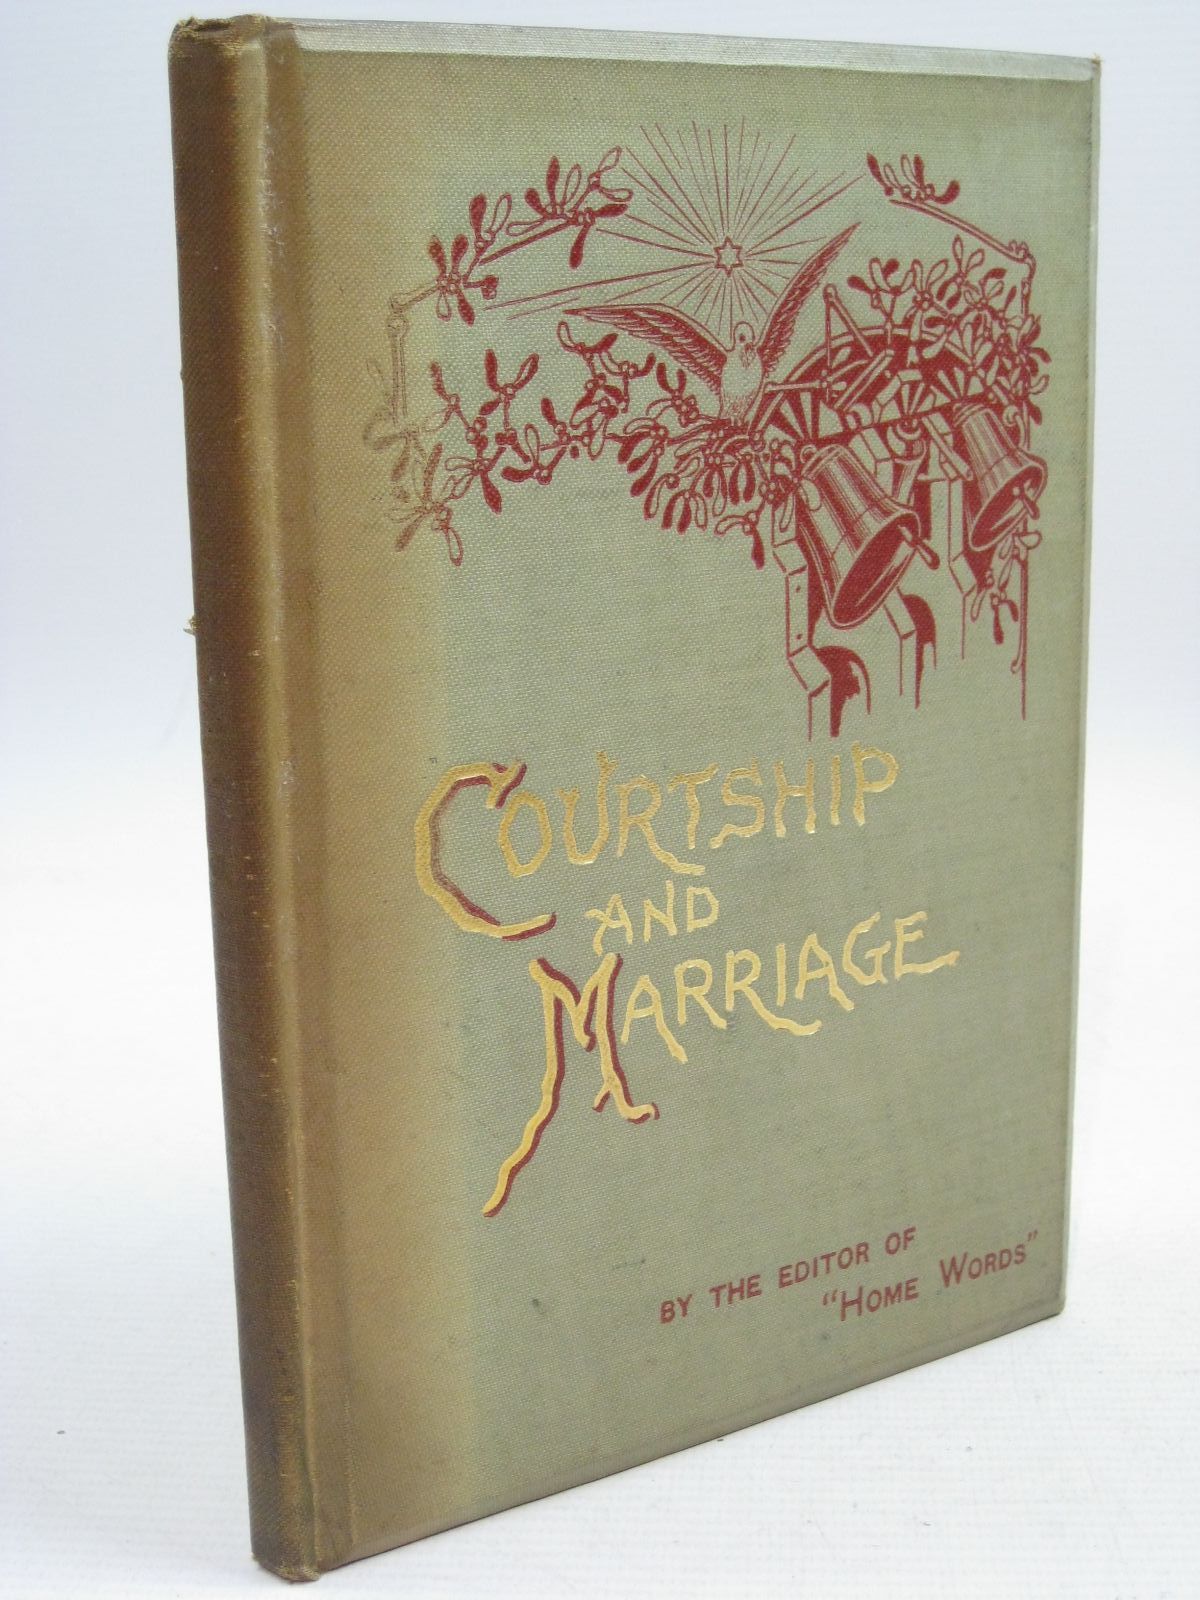 Photo of COURTSHIP AND MARRIAGE written by Bullock, Charles published by Home Words Publishing Office (STOCK CODE: 1505210)  for sale by Stella & Rose's Books